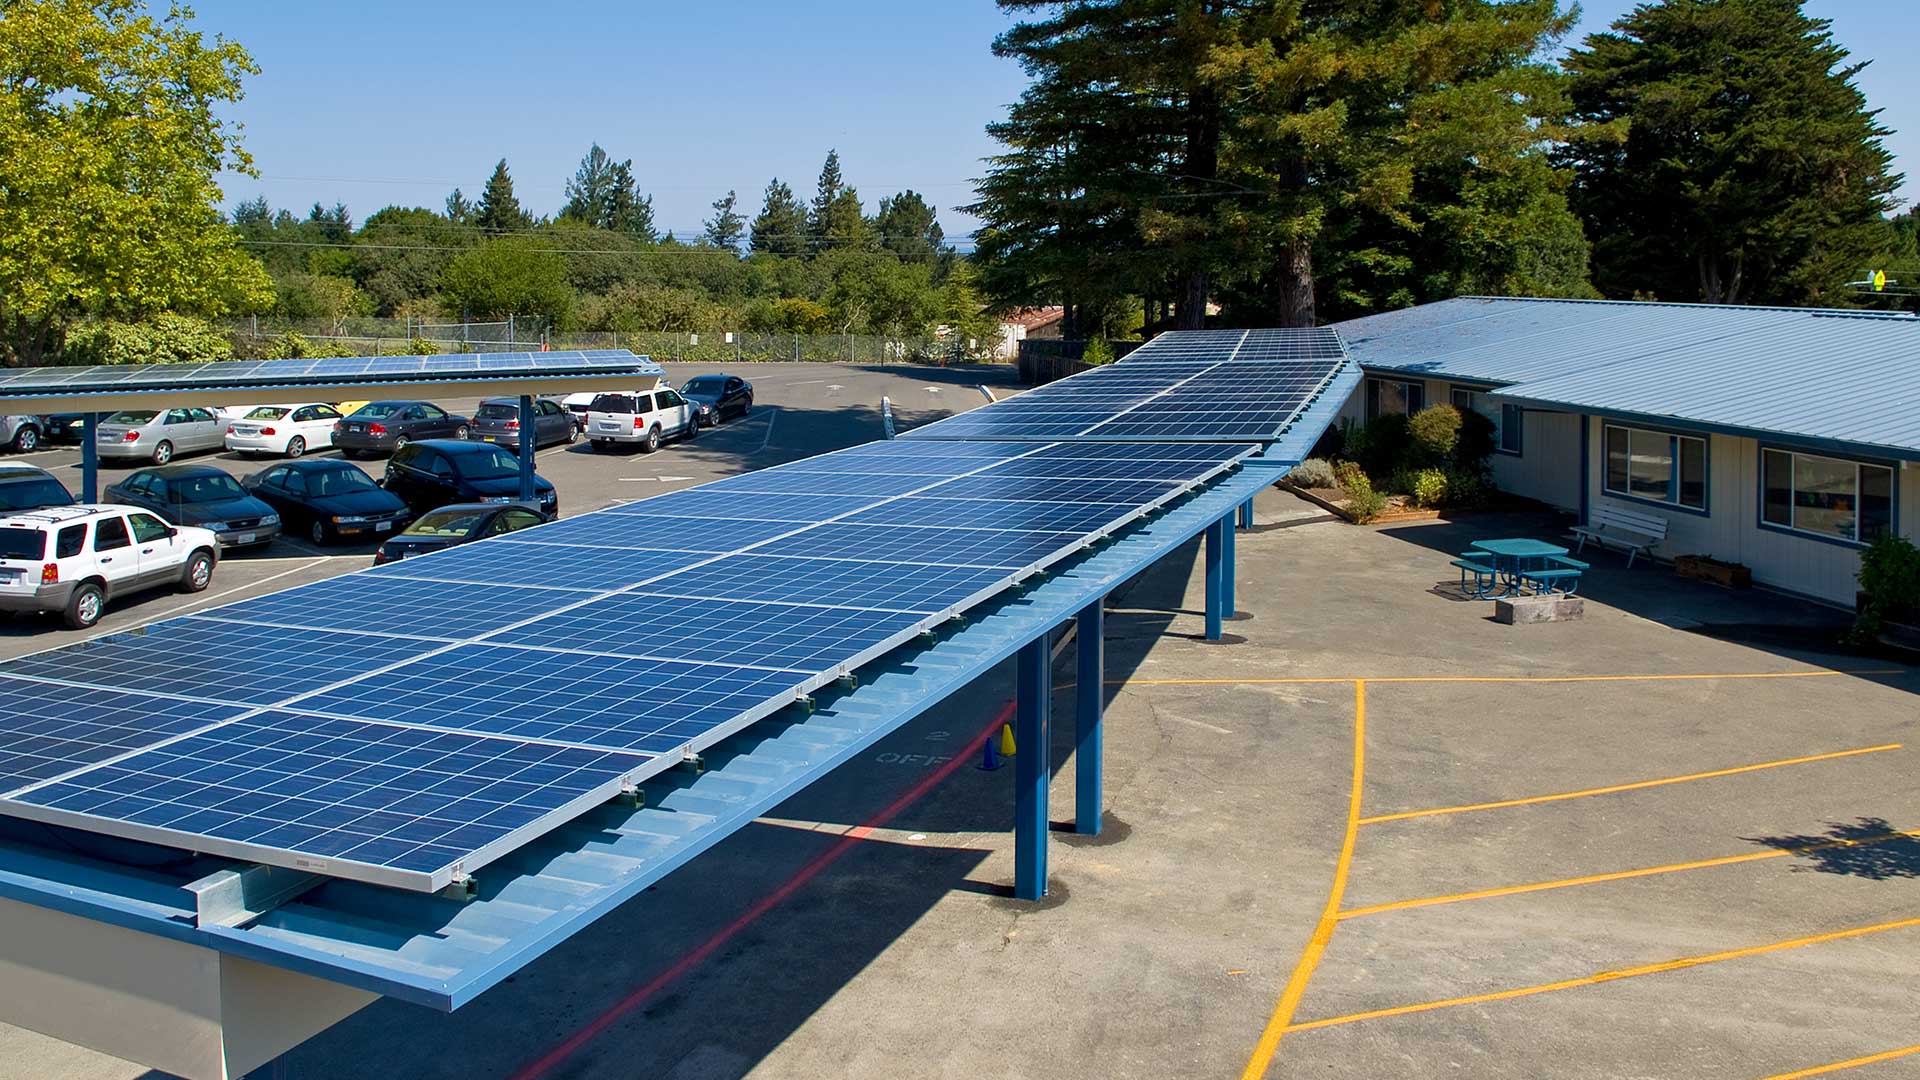 Covered walkways in parking area with solar panels extending along the roof.